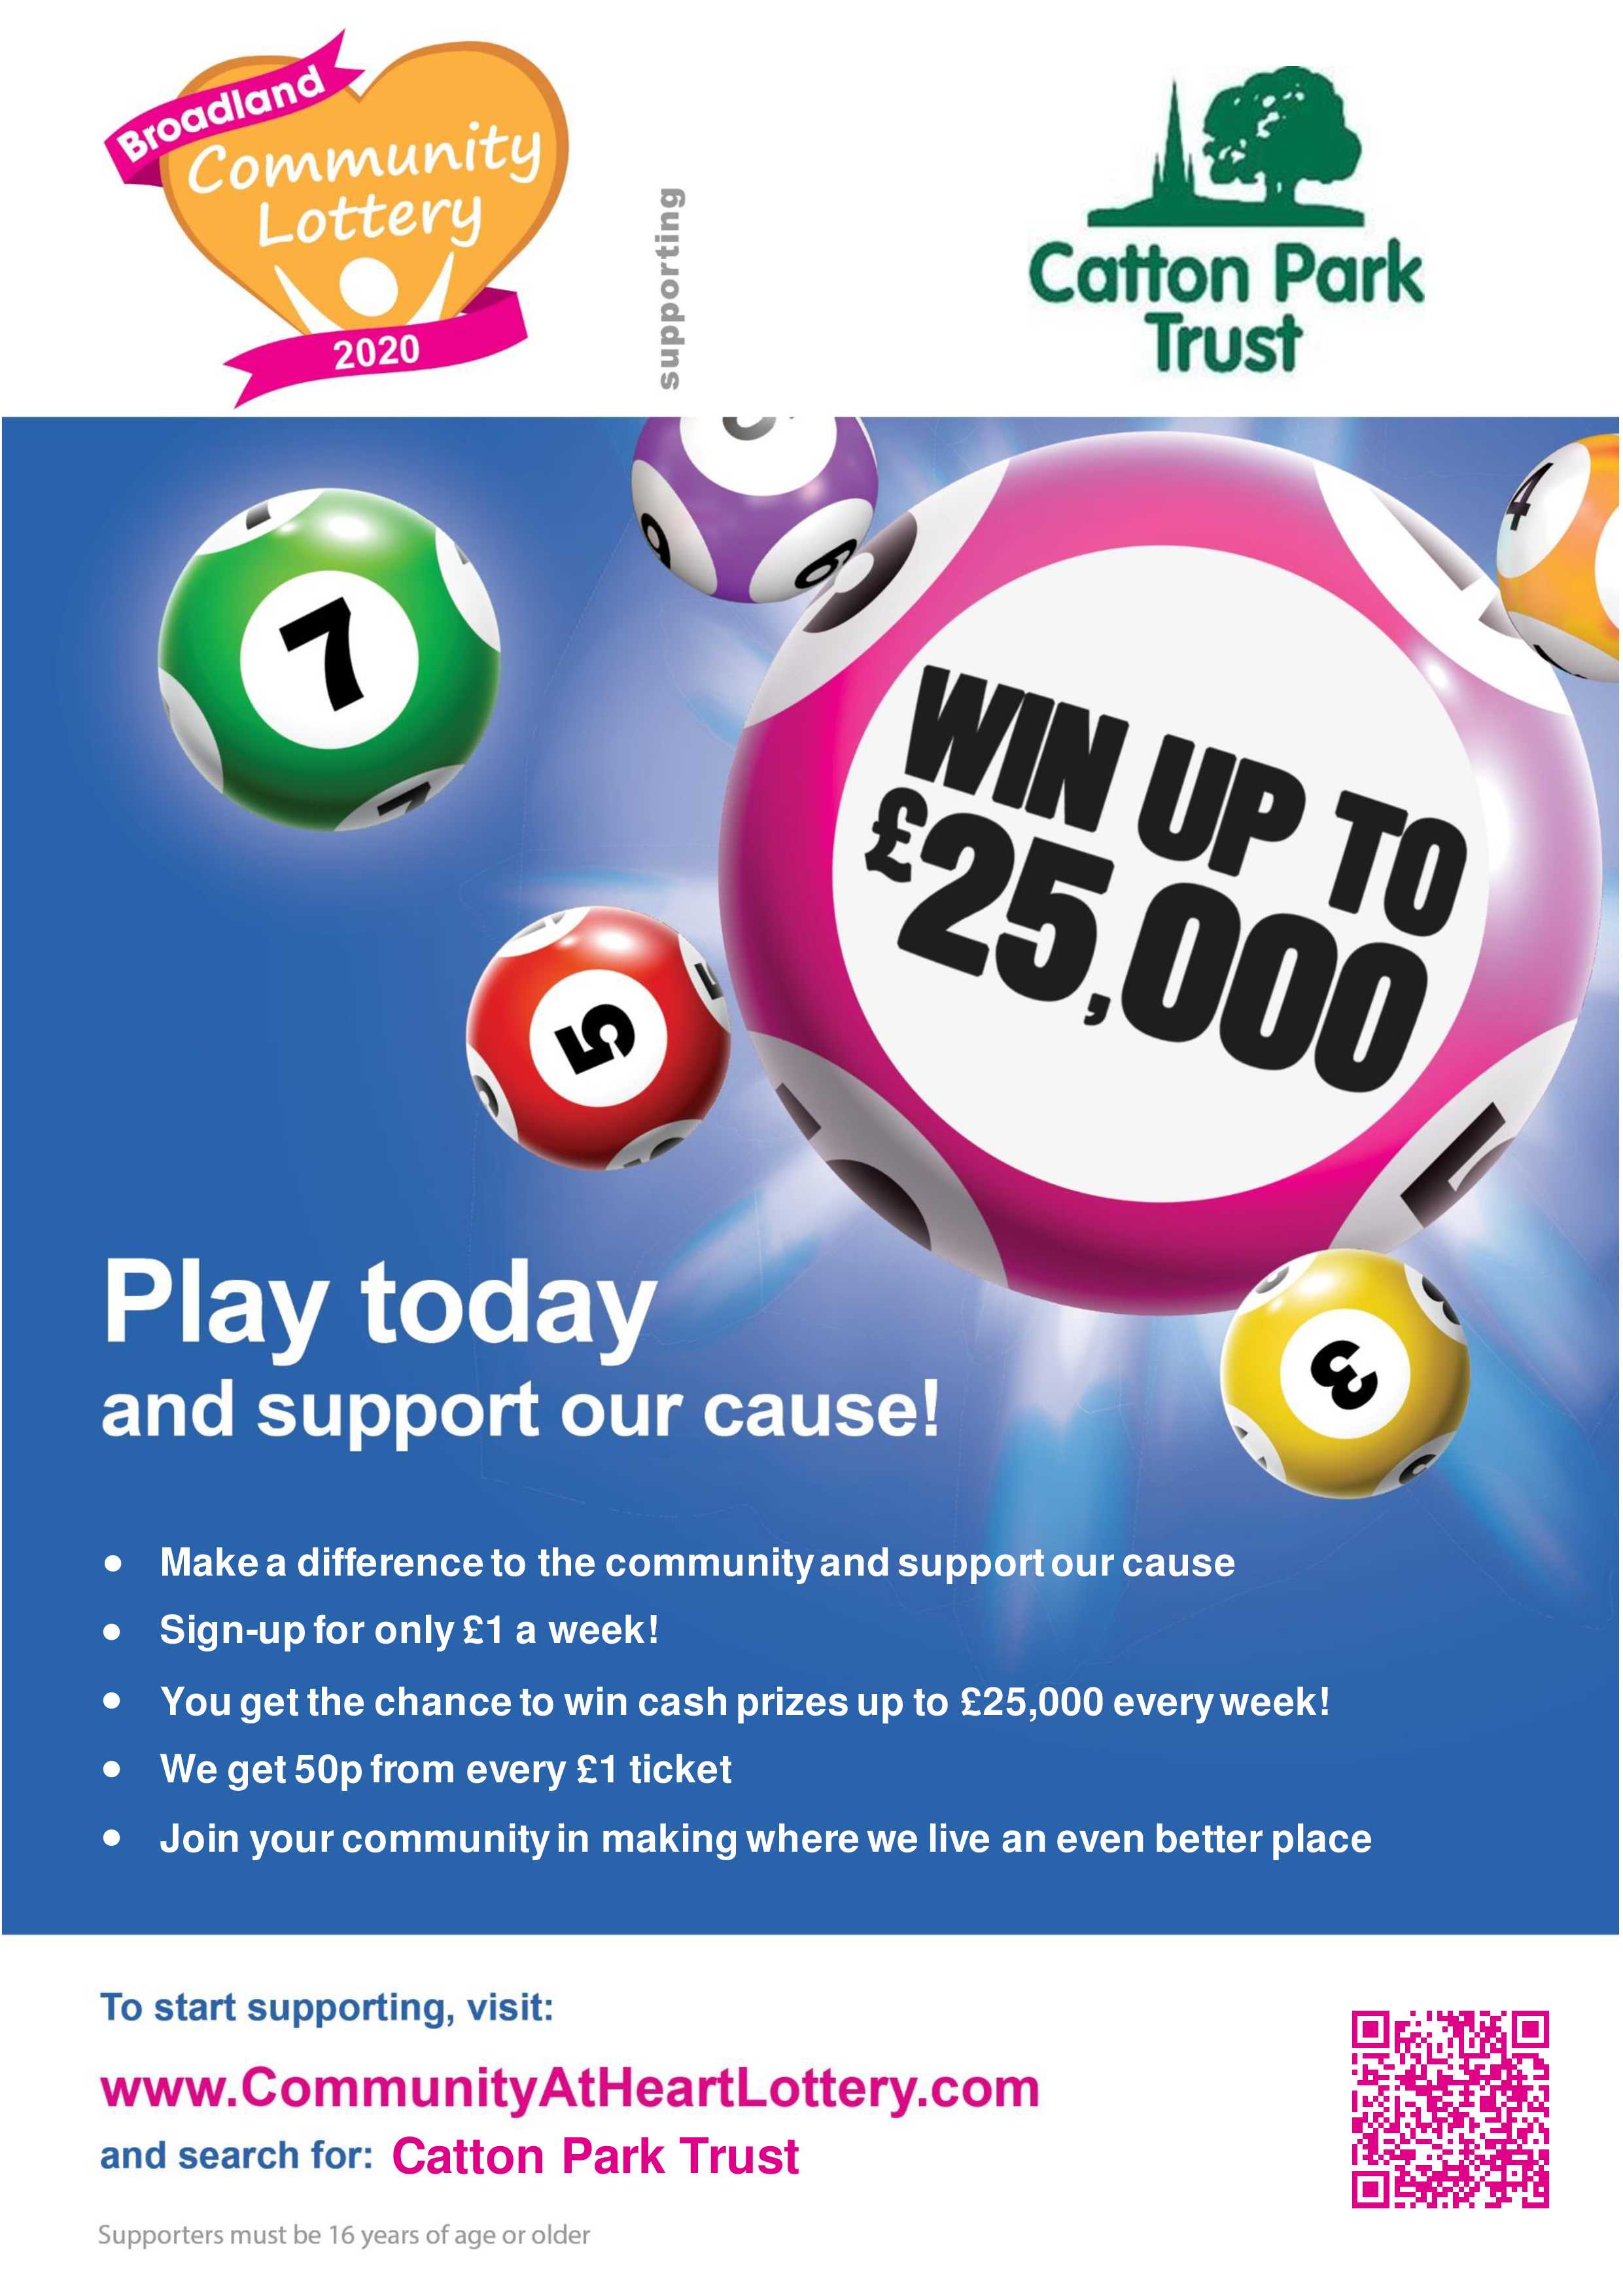 Broadland Community Lottery - Keep Supporting